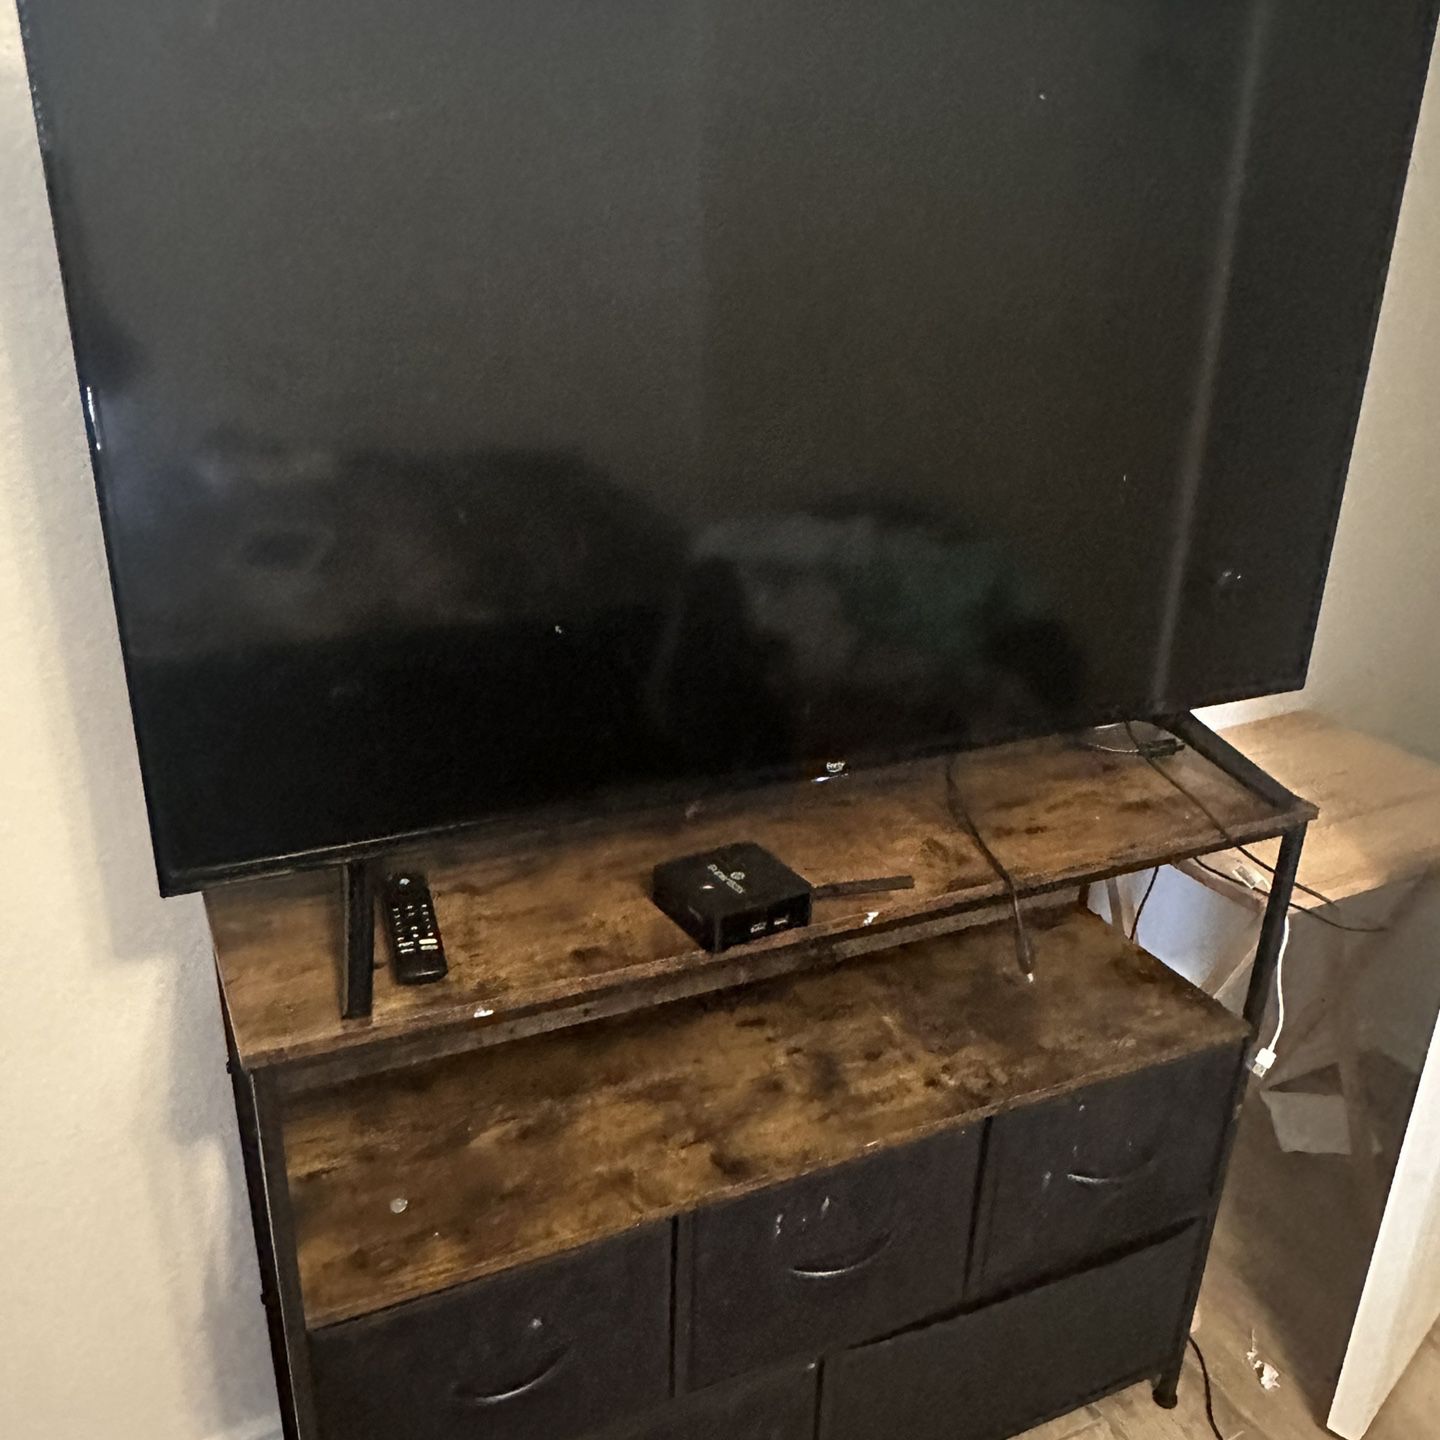 55 Inch 4K fire TV With stand